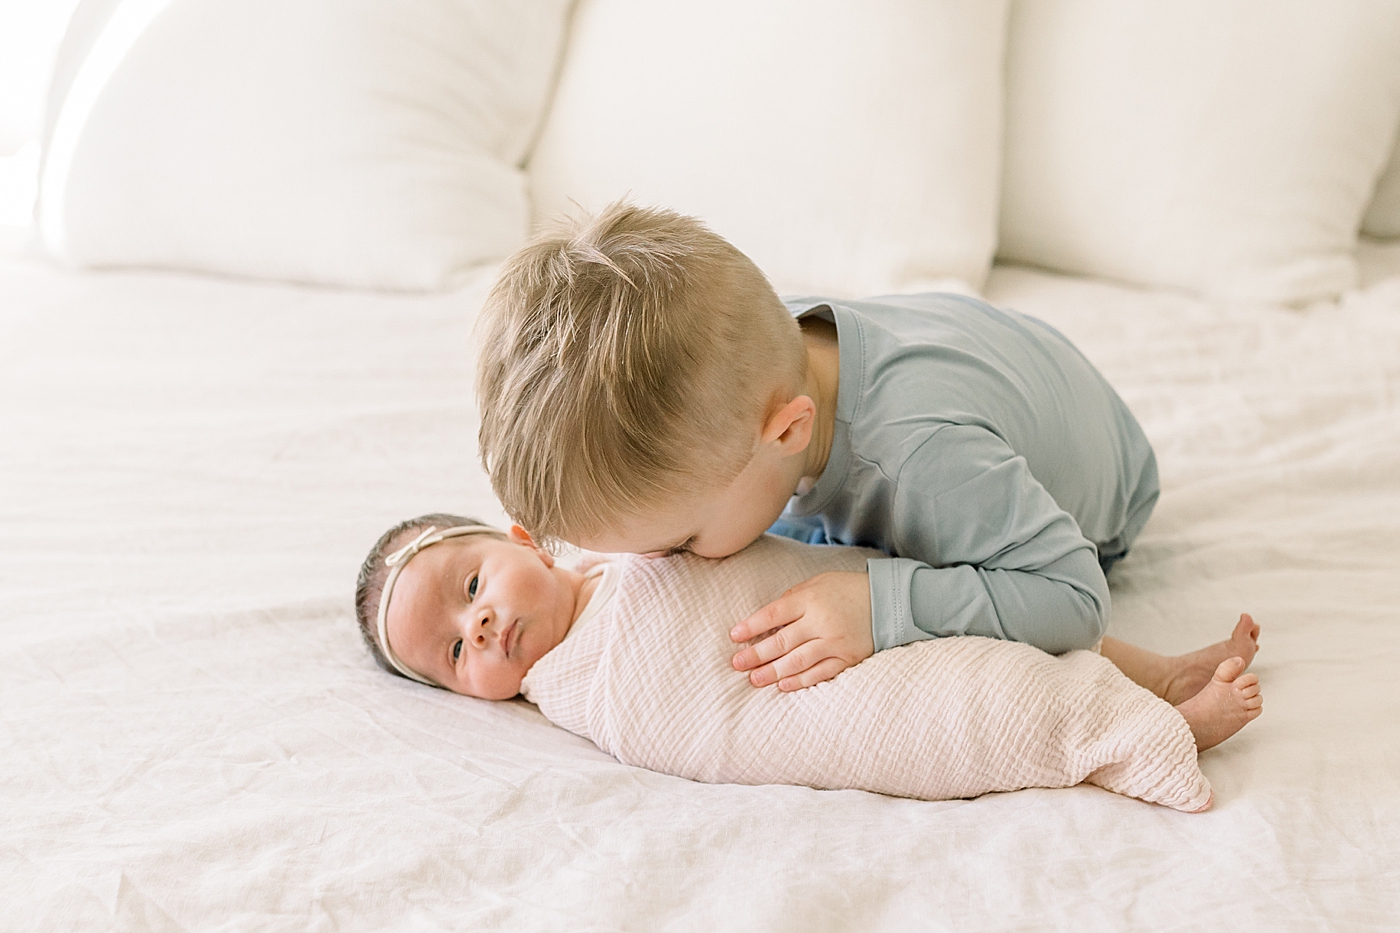 Toddler boy hugging his new baby sister | Image by Caitlyn Motycka